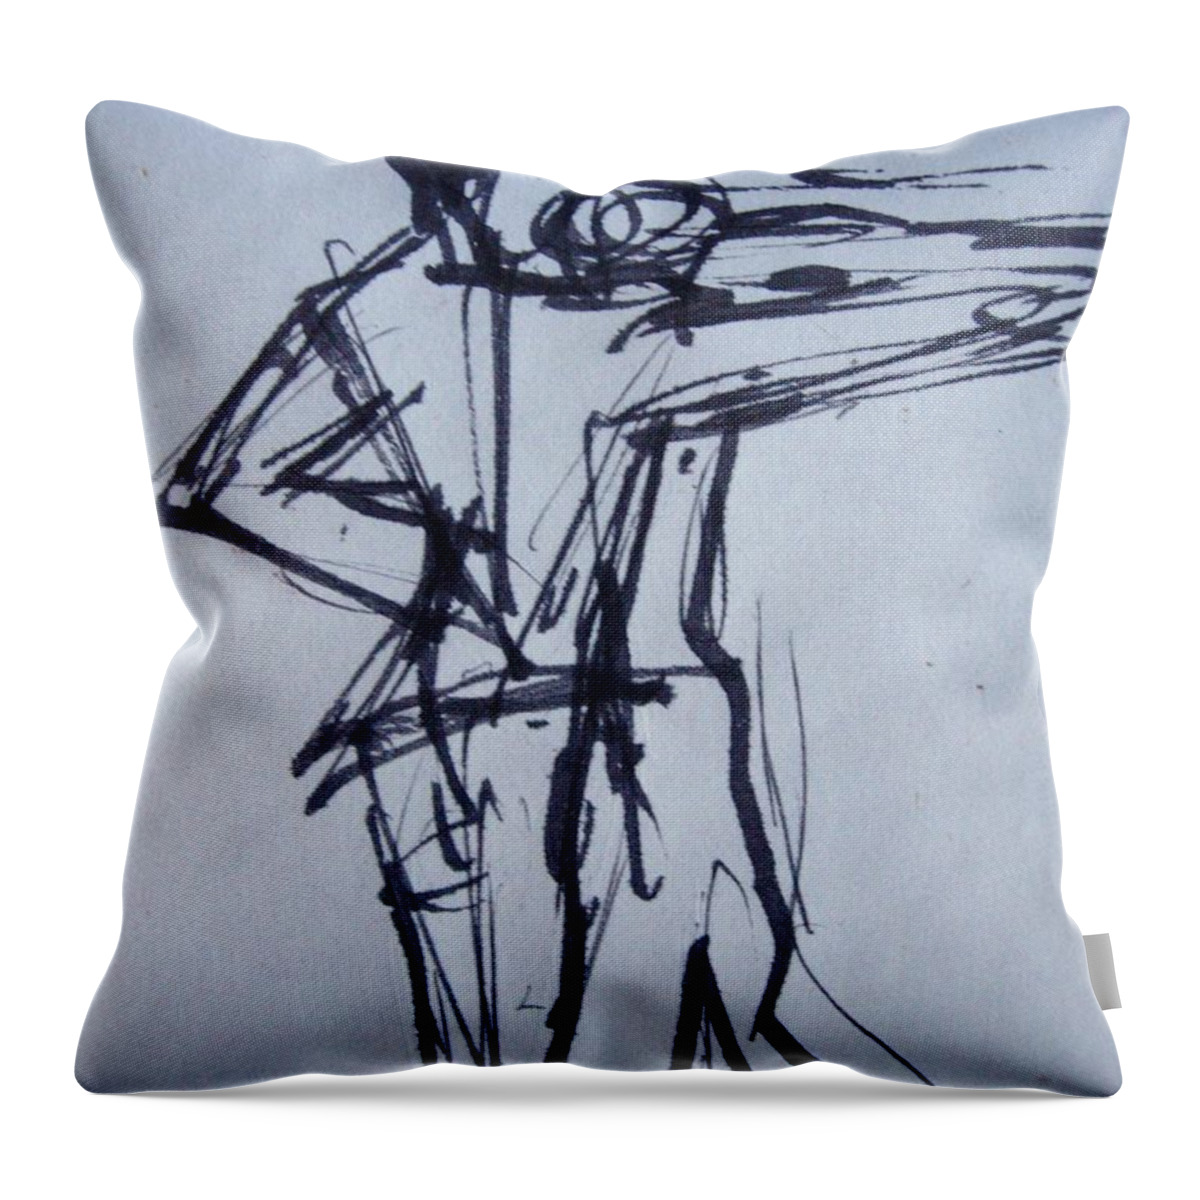 Dancers Throw Pillow featuring the drawing Do You Come Here Often by Diane montana Jansson